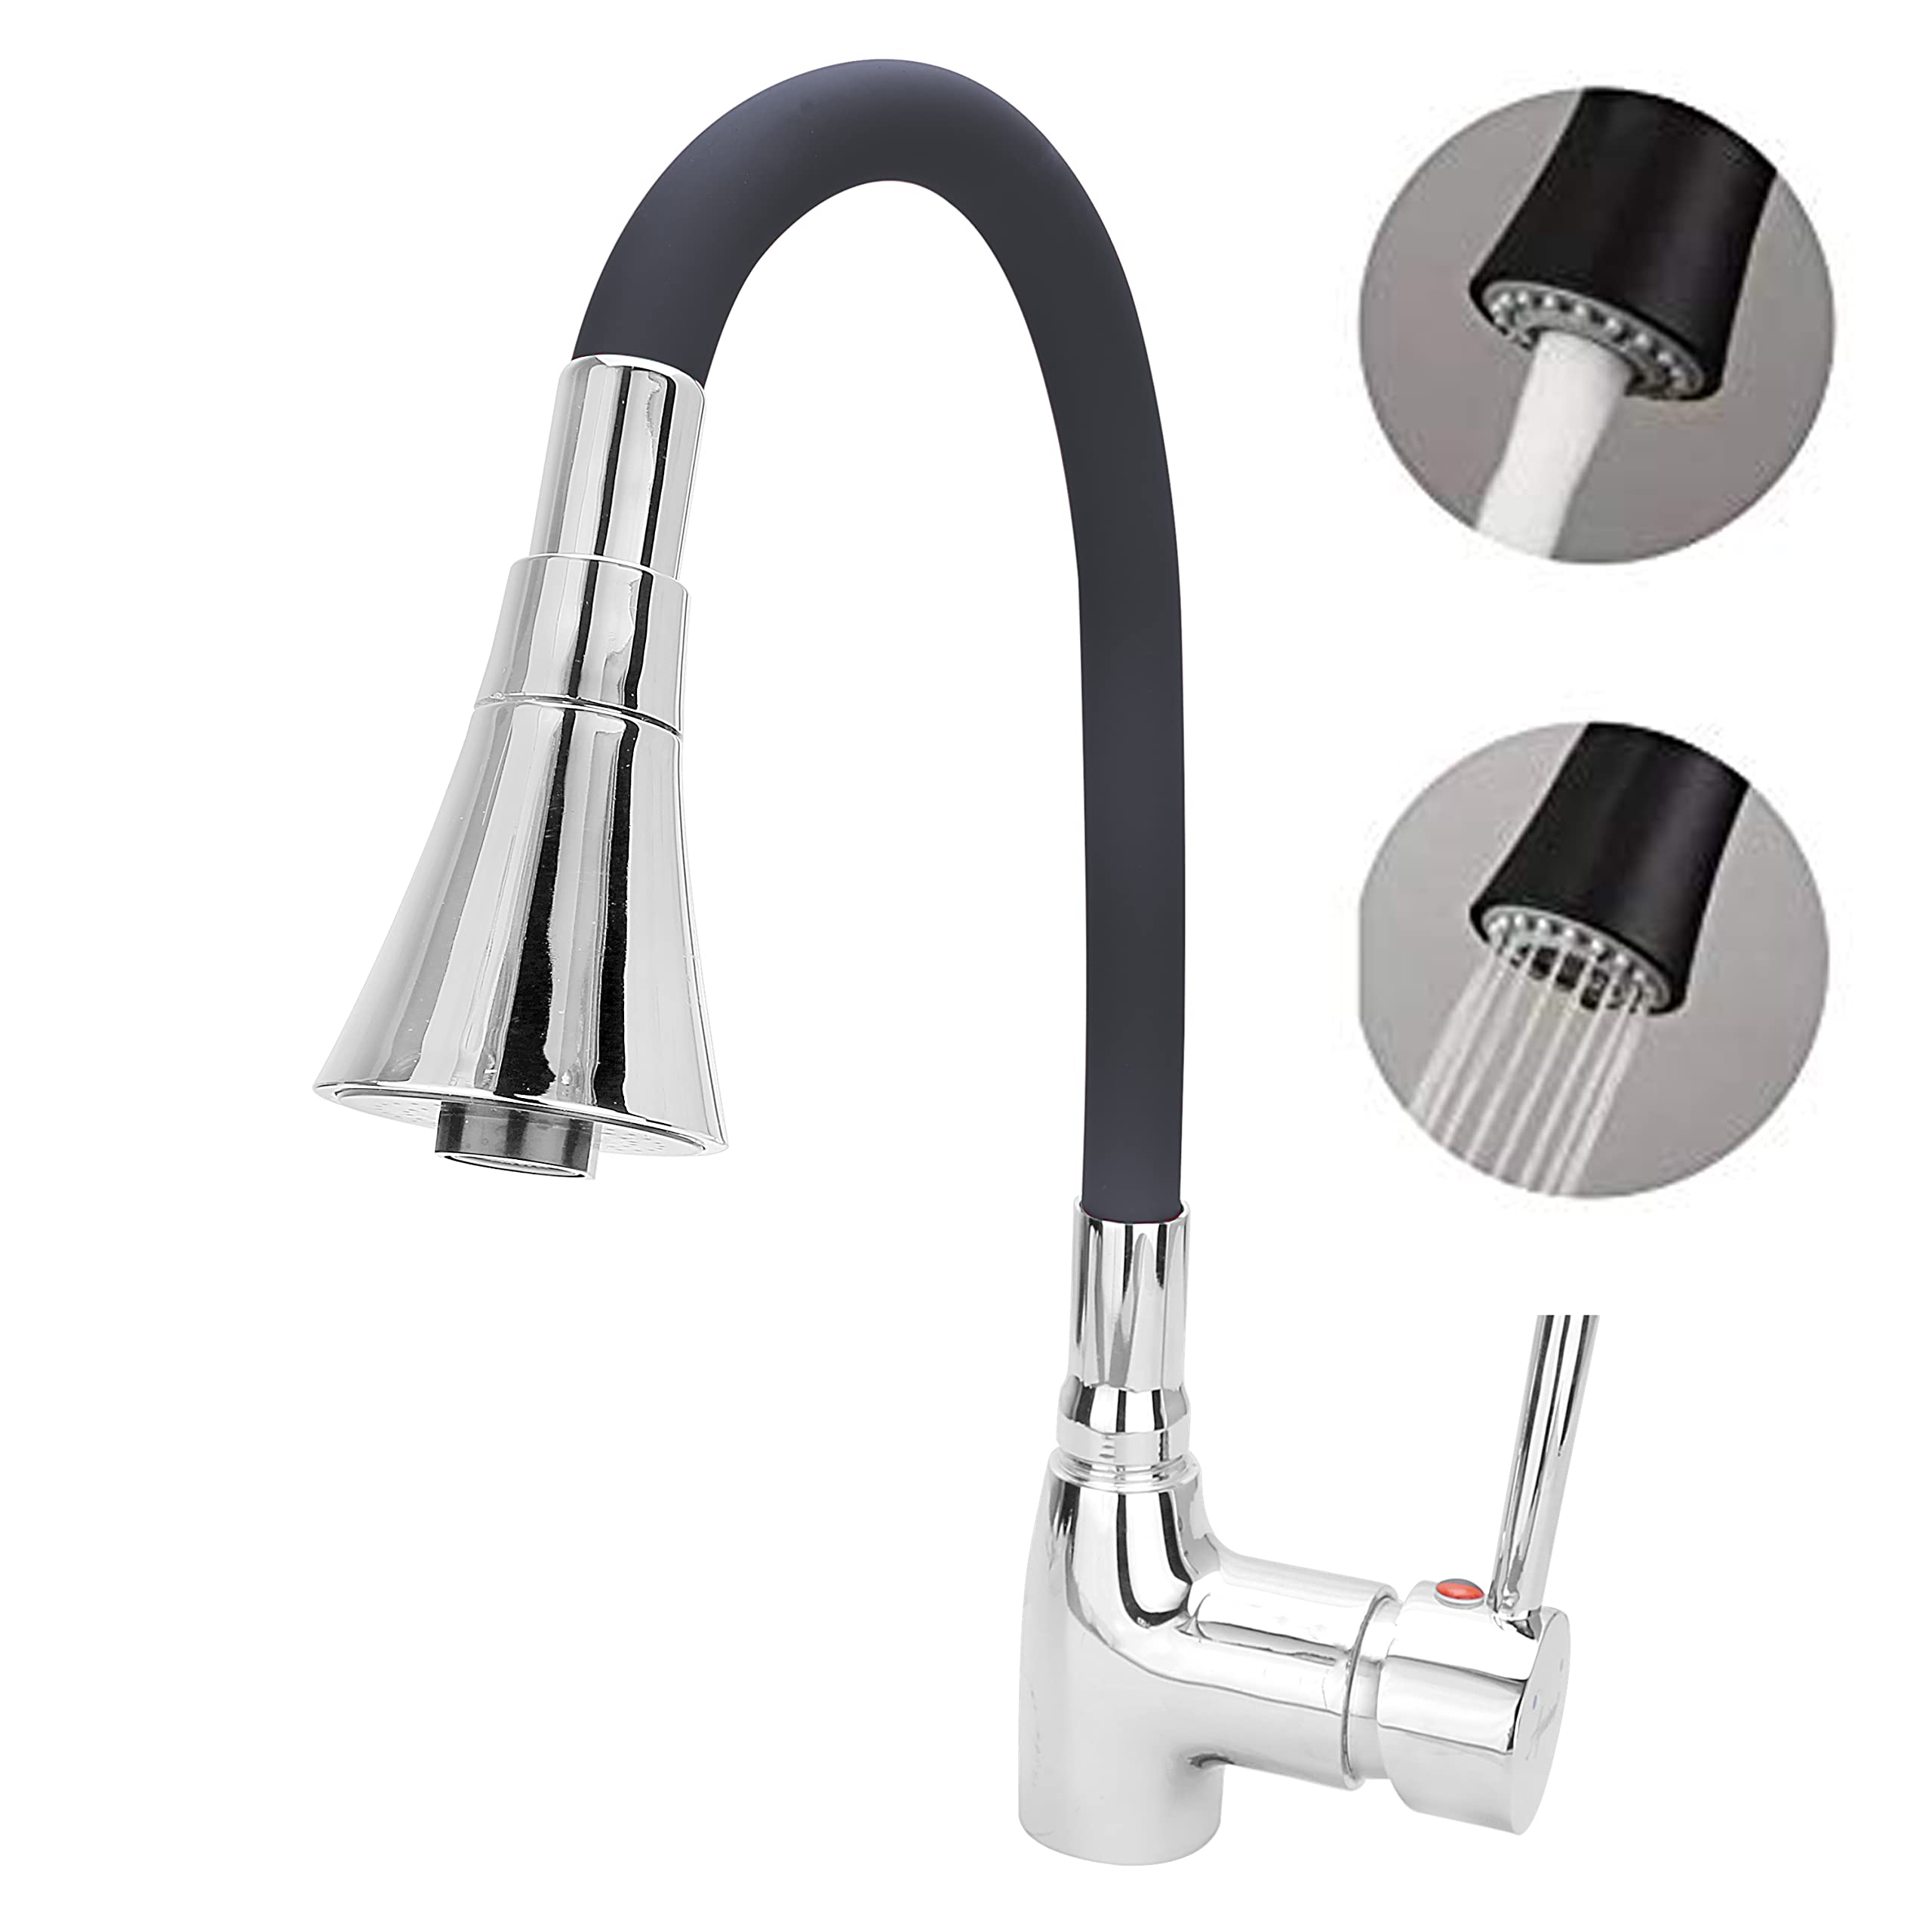 Aquieen Pull Out Kitchen Sink Mixer with Connecting Hoses (Pull Out Kitchen Mixer Fusion) (Kitchen Mixer Fluid Black Chrome)